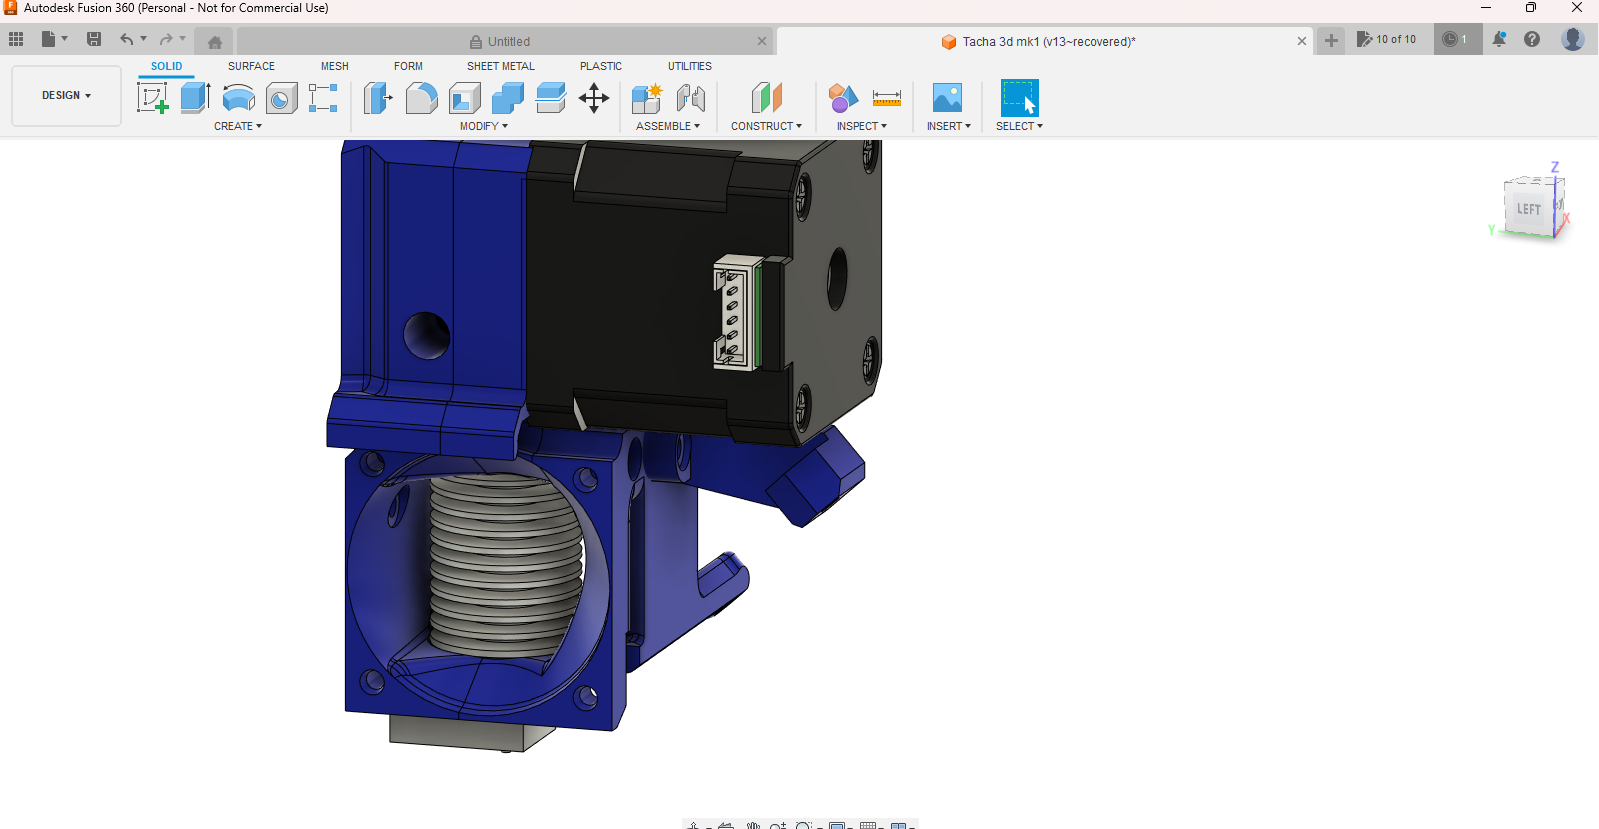 Autodesk Fusion 360 (Personal - Not for Commercial Use) 6_29_2023 10_04_30 PM.png